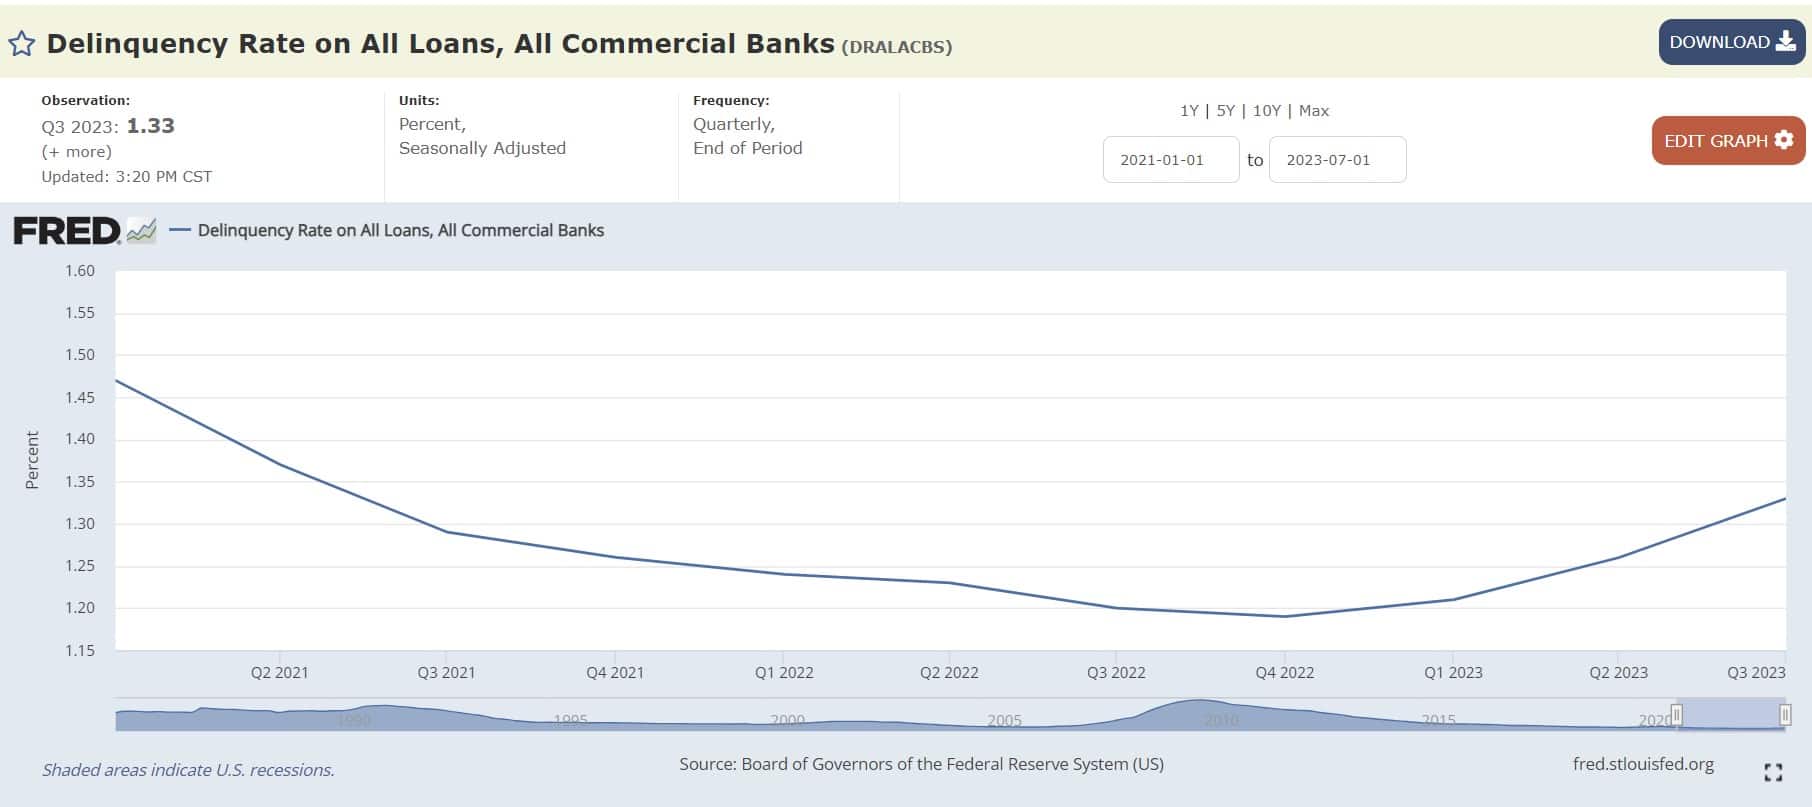  Delinquency Rate on All Loans, All Commercial Banks